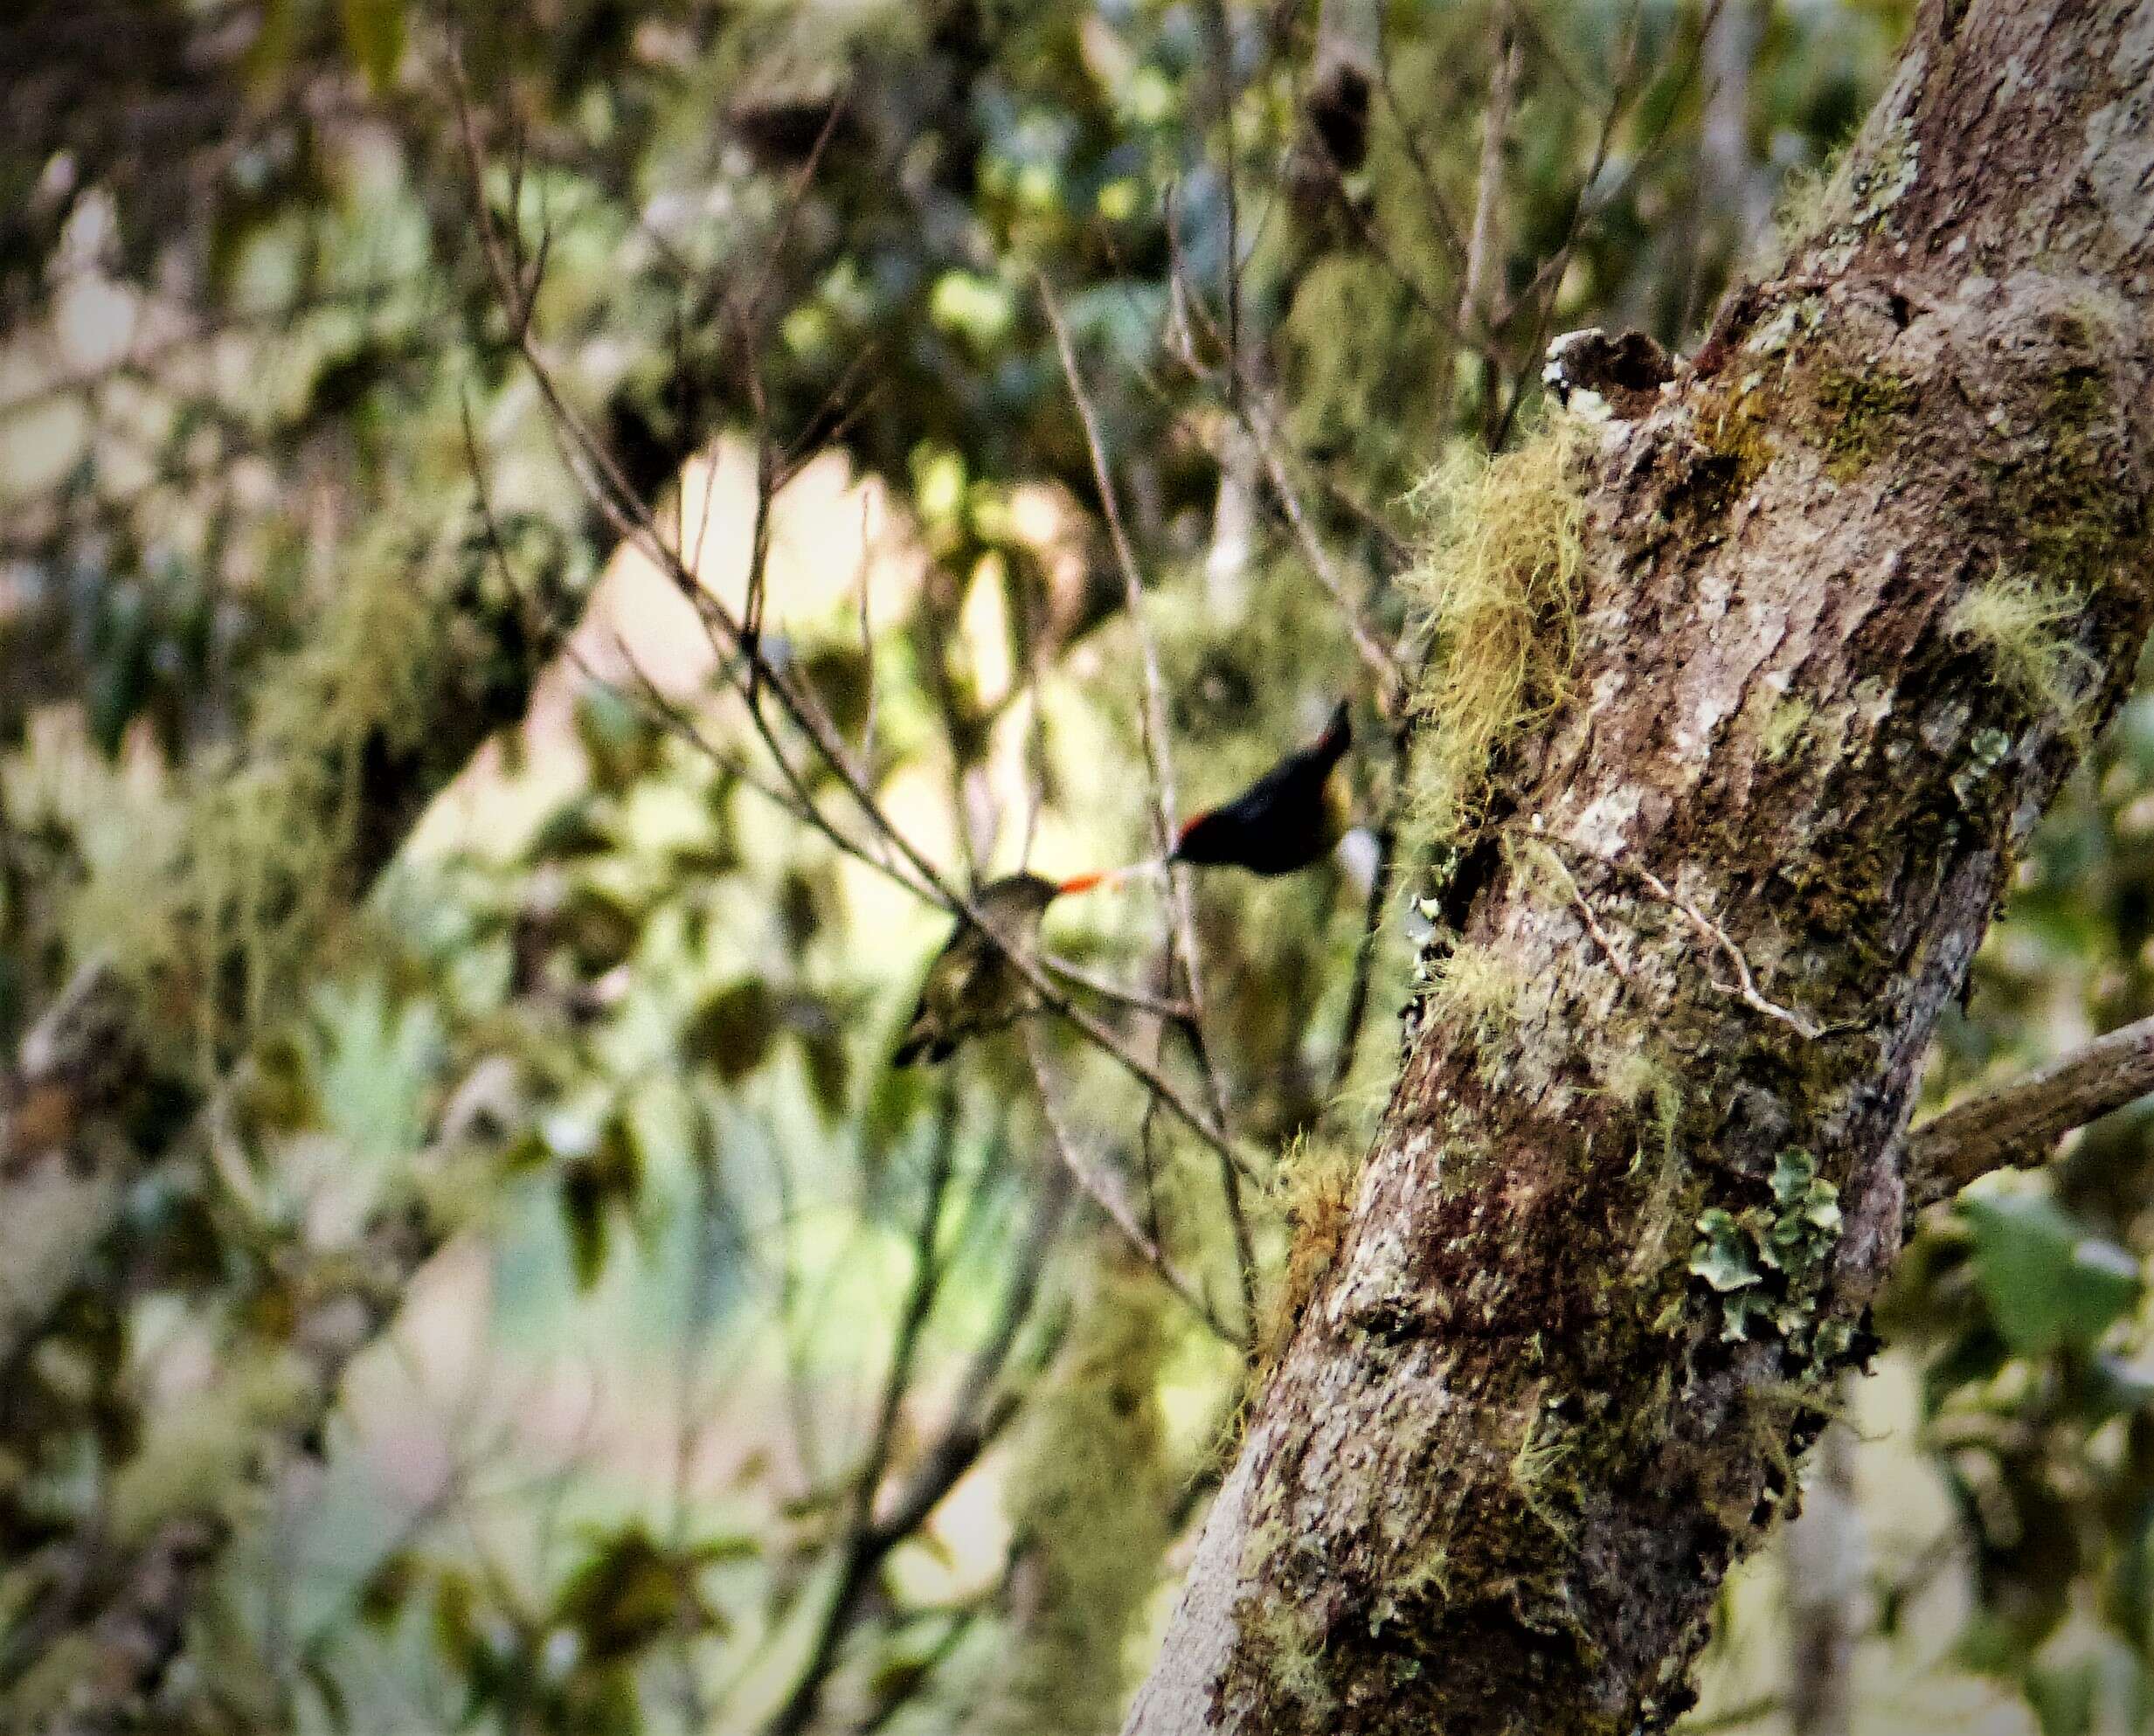 Image of Red-capped Flowerpecker